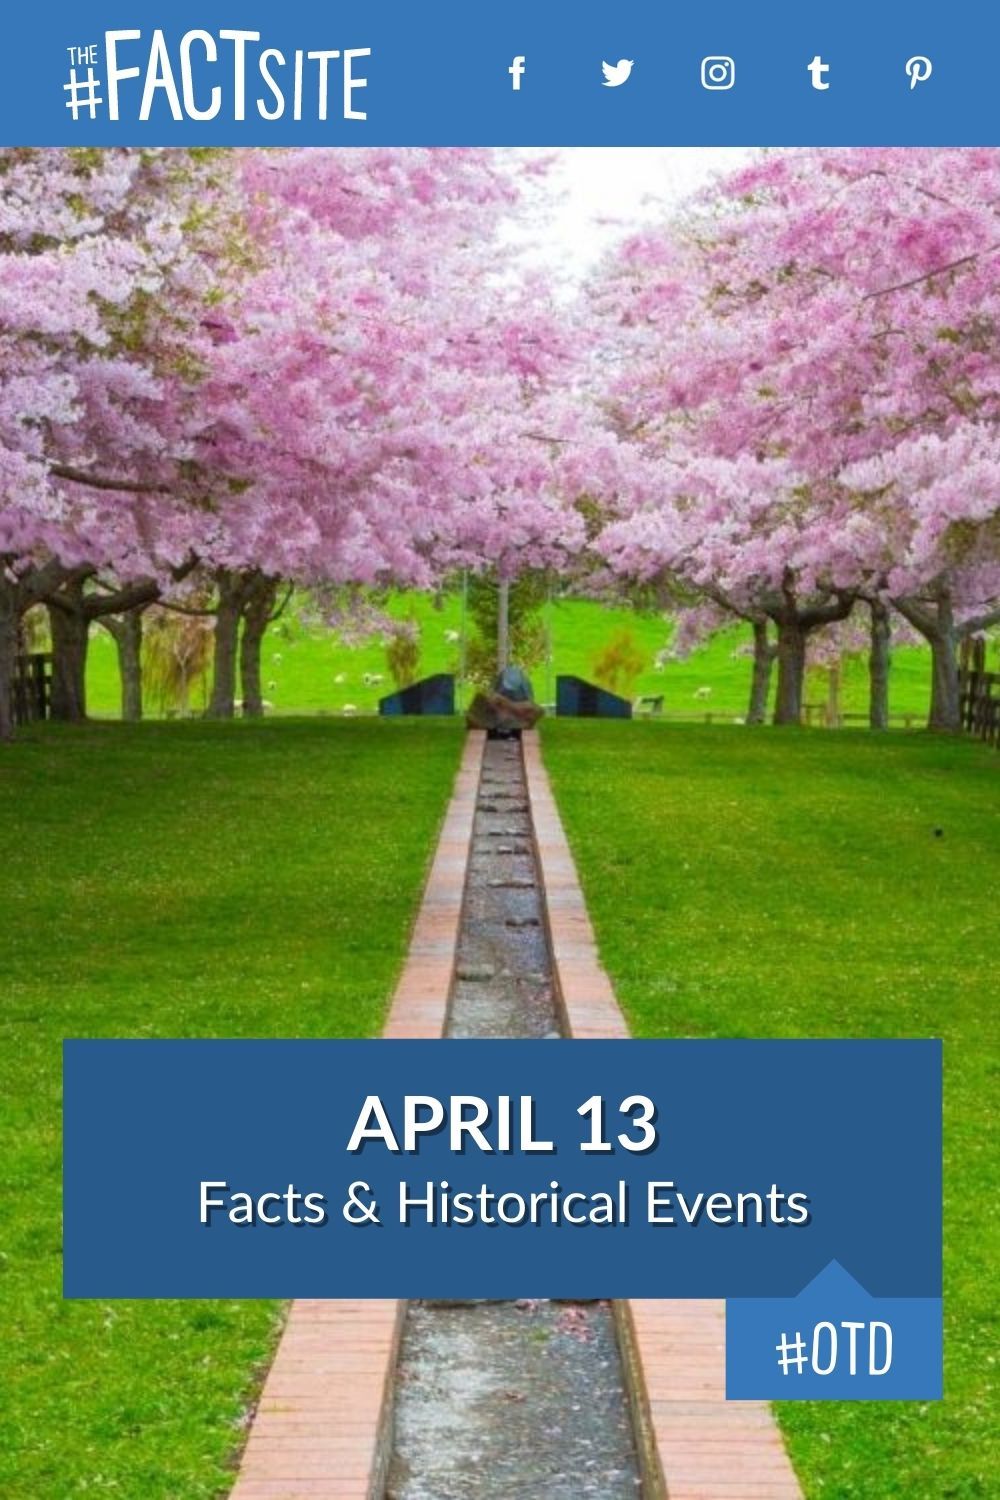 April 13: Facts & Historical Events On This Day